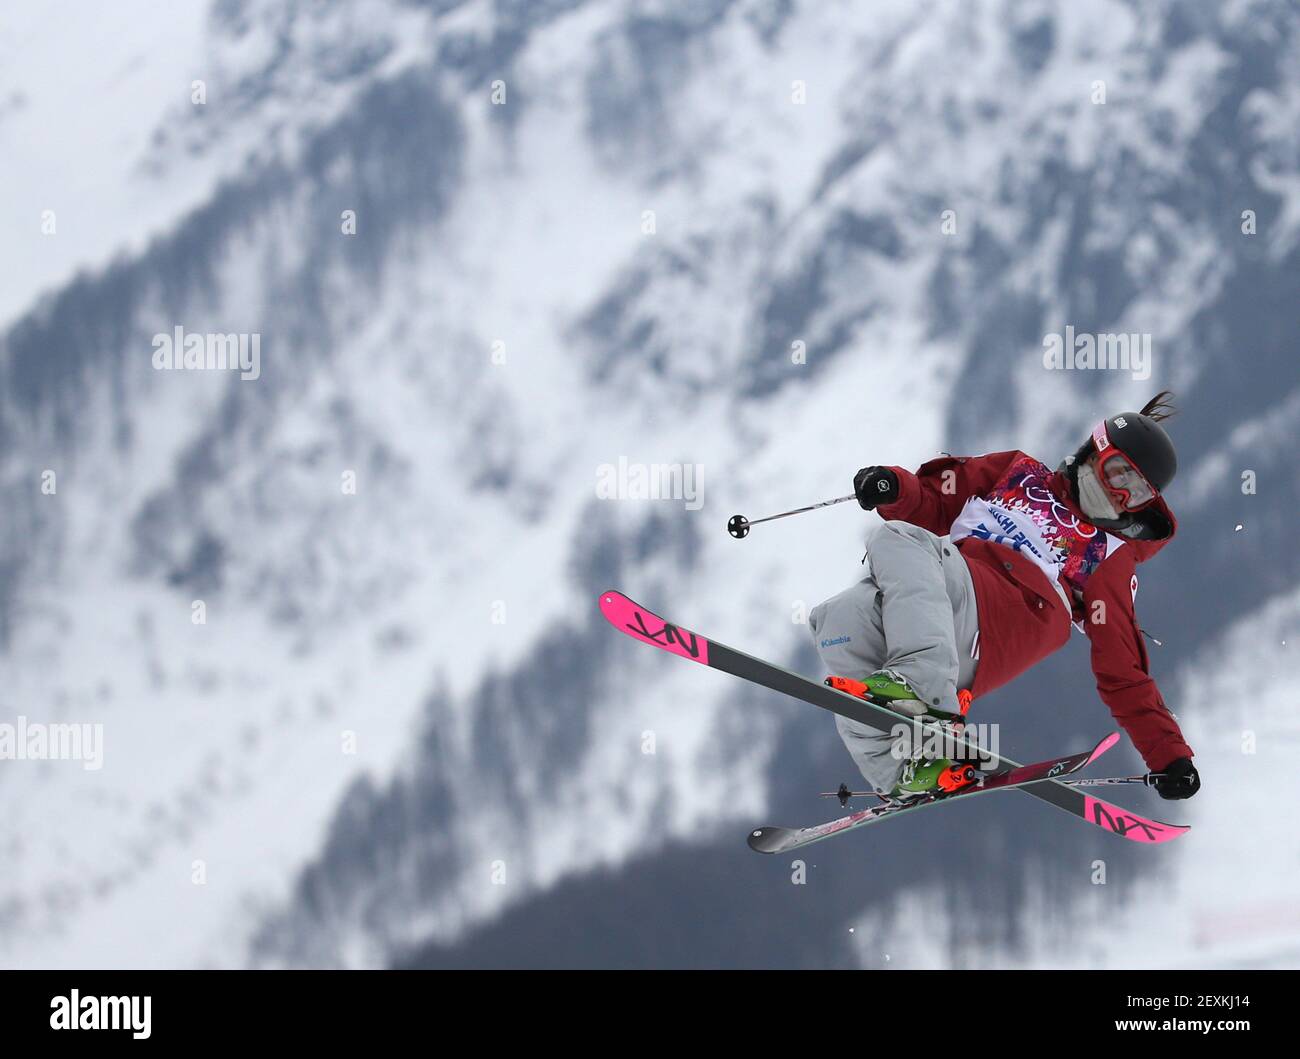 Yuki Tsubota, of Canada, competes in the ladies' ski slopestyle at the Rosa Khutor Extreme Park during the Winter Olympics in Sochi, Russia, Tuesday, Feb. 11, 2014. (Photo by Brian Cassella/Chicago Tribune/MCT/Sipa USA) Stock Photo